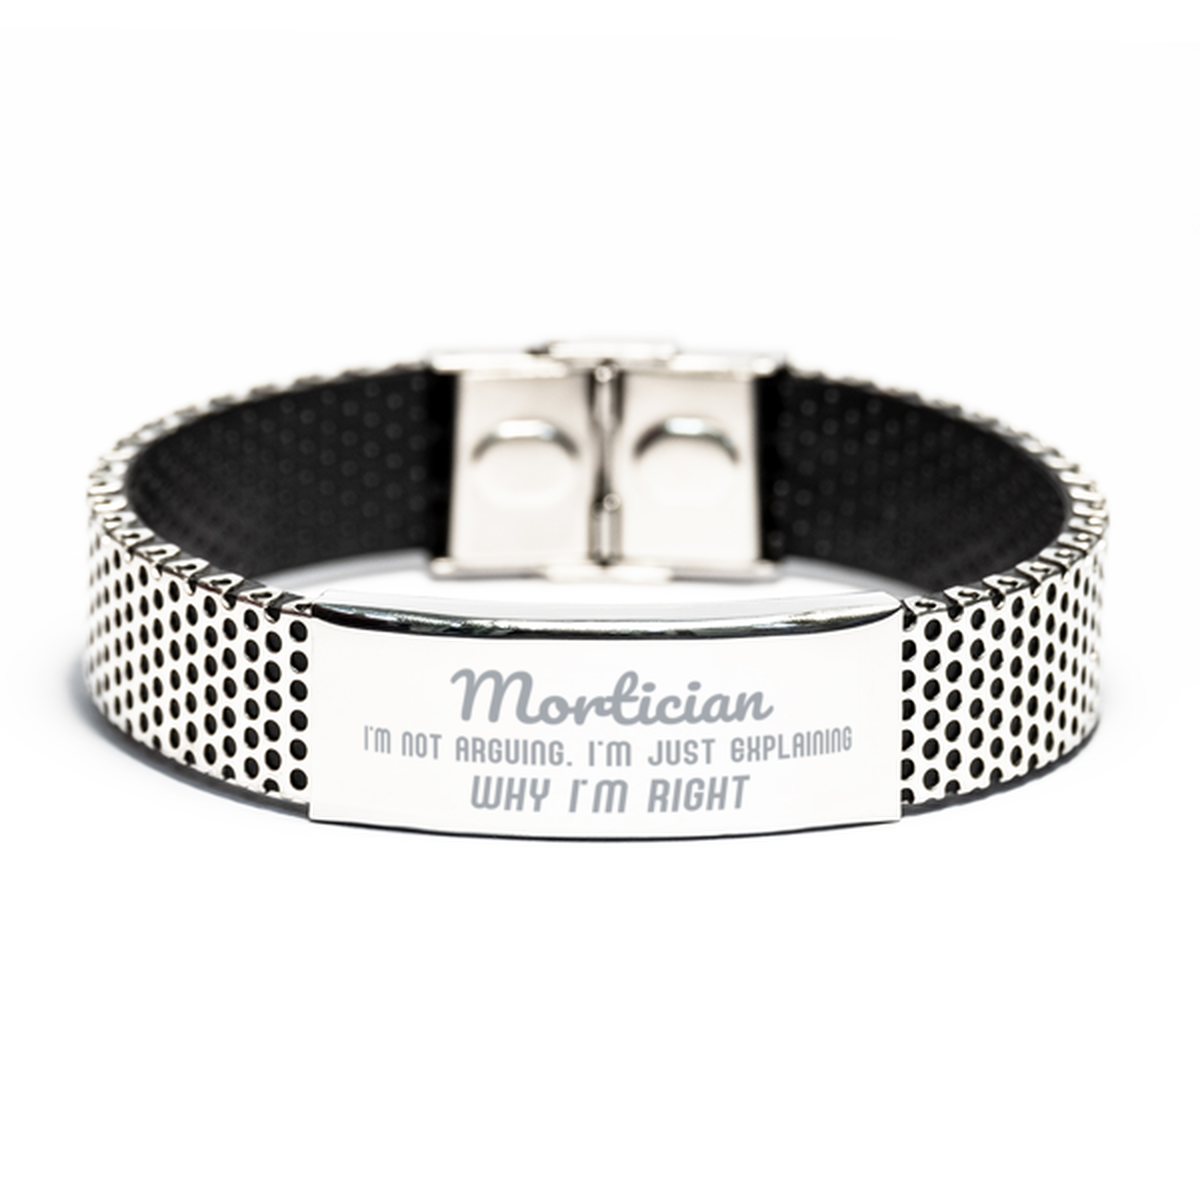 Mortician I'm not Arguing. I'm Just Explaining Why I'm RIGHT Stainless Steel Bracelet, Funny Saying Quote Mortician Gifts For Mortician Graduation Birthday Christmas Gifts for Men Women Coworker